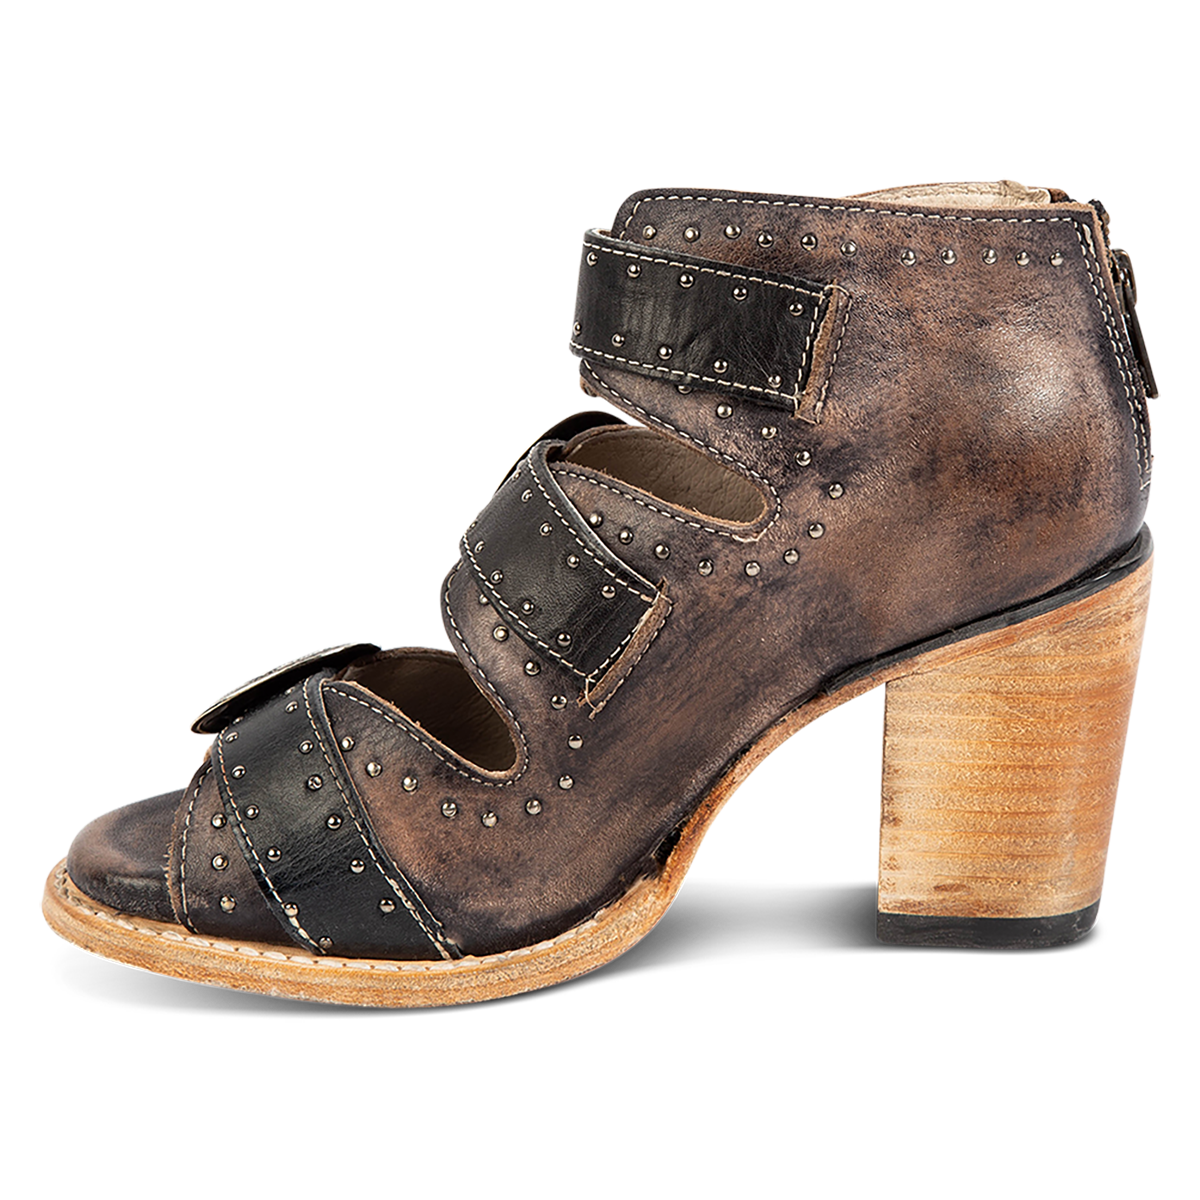 Inside view showing a stacked heel and studded embellishments on FREEBIRD women's Violet black distressed leather sandal 